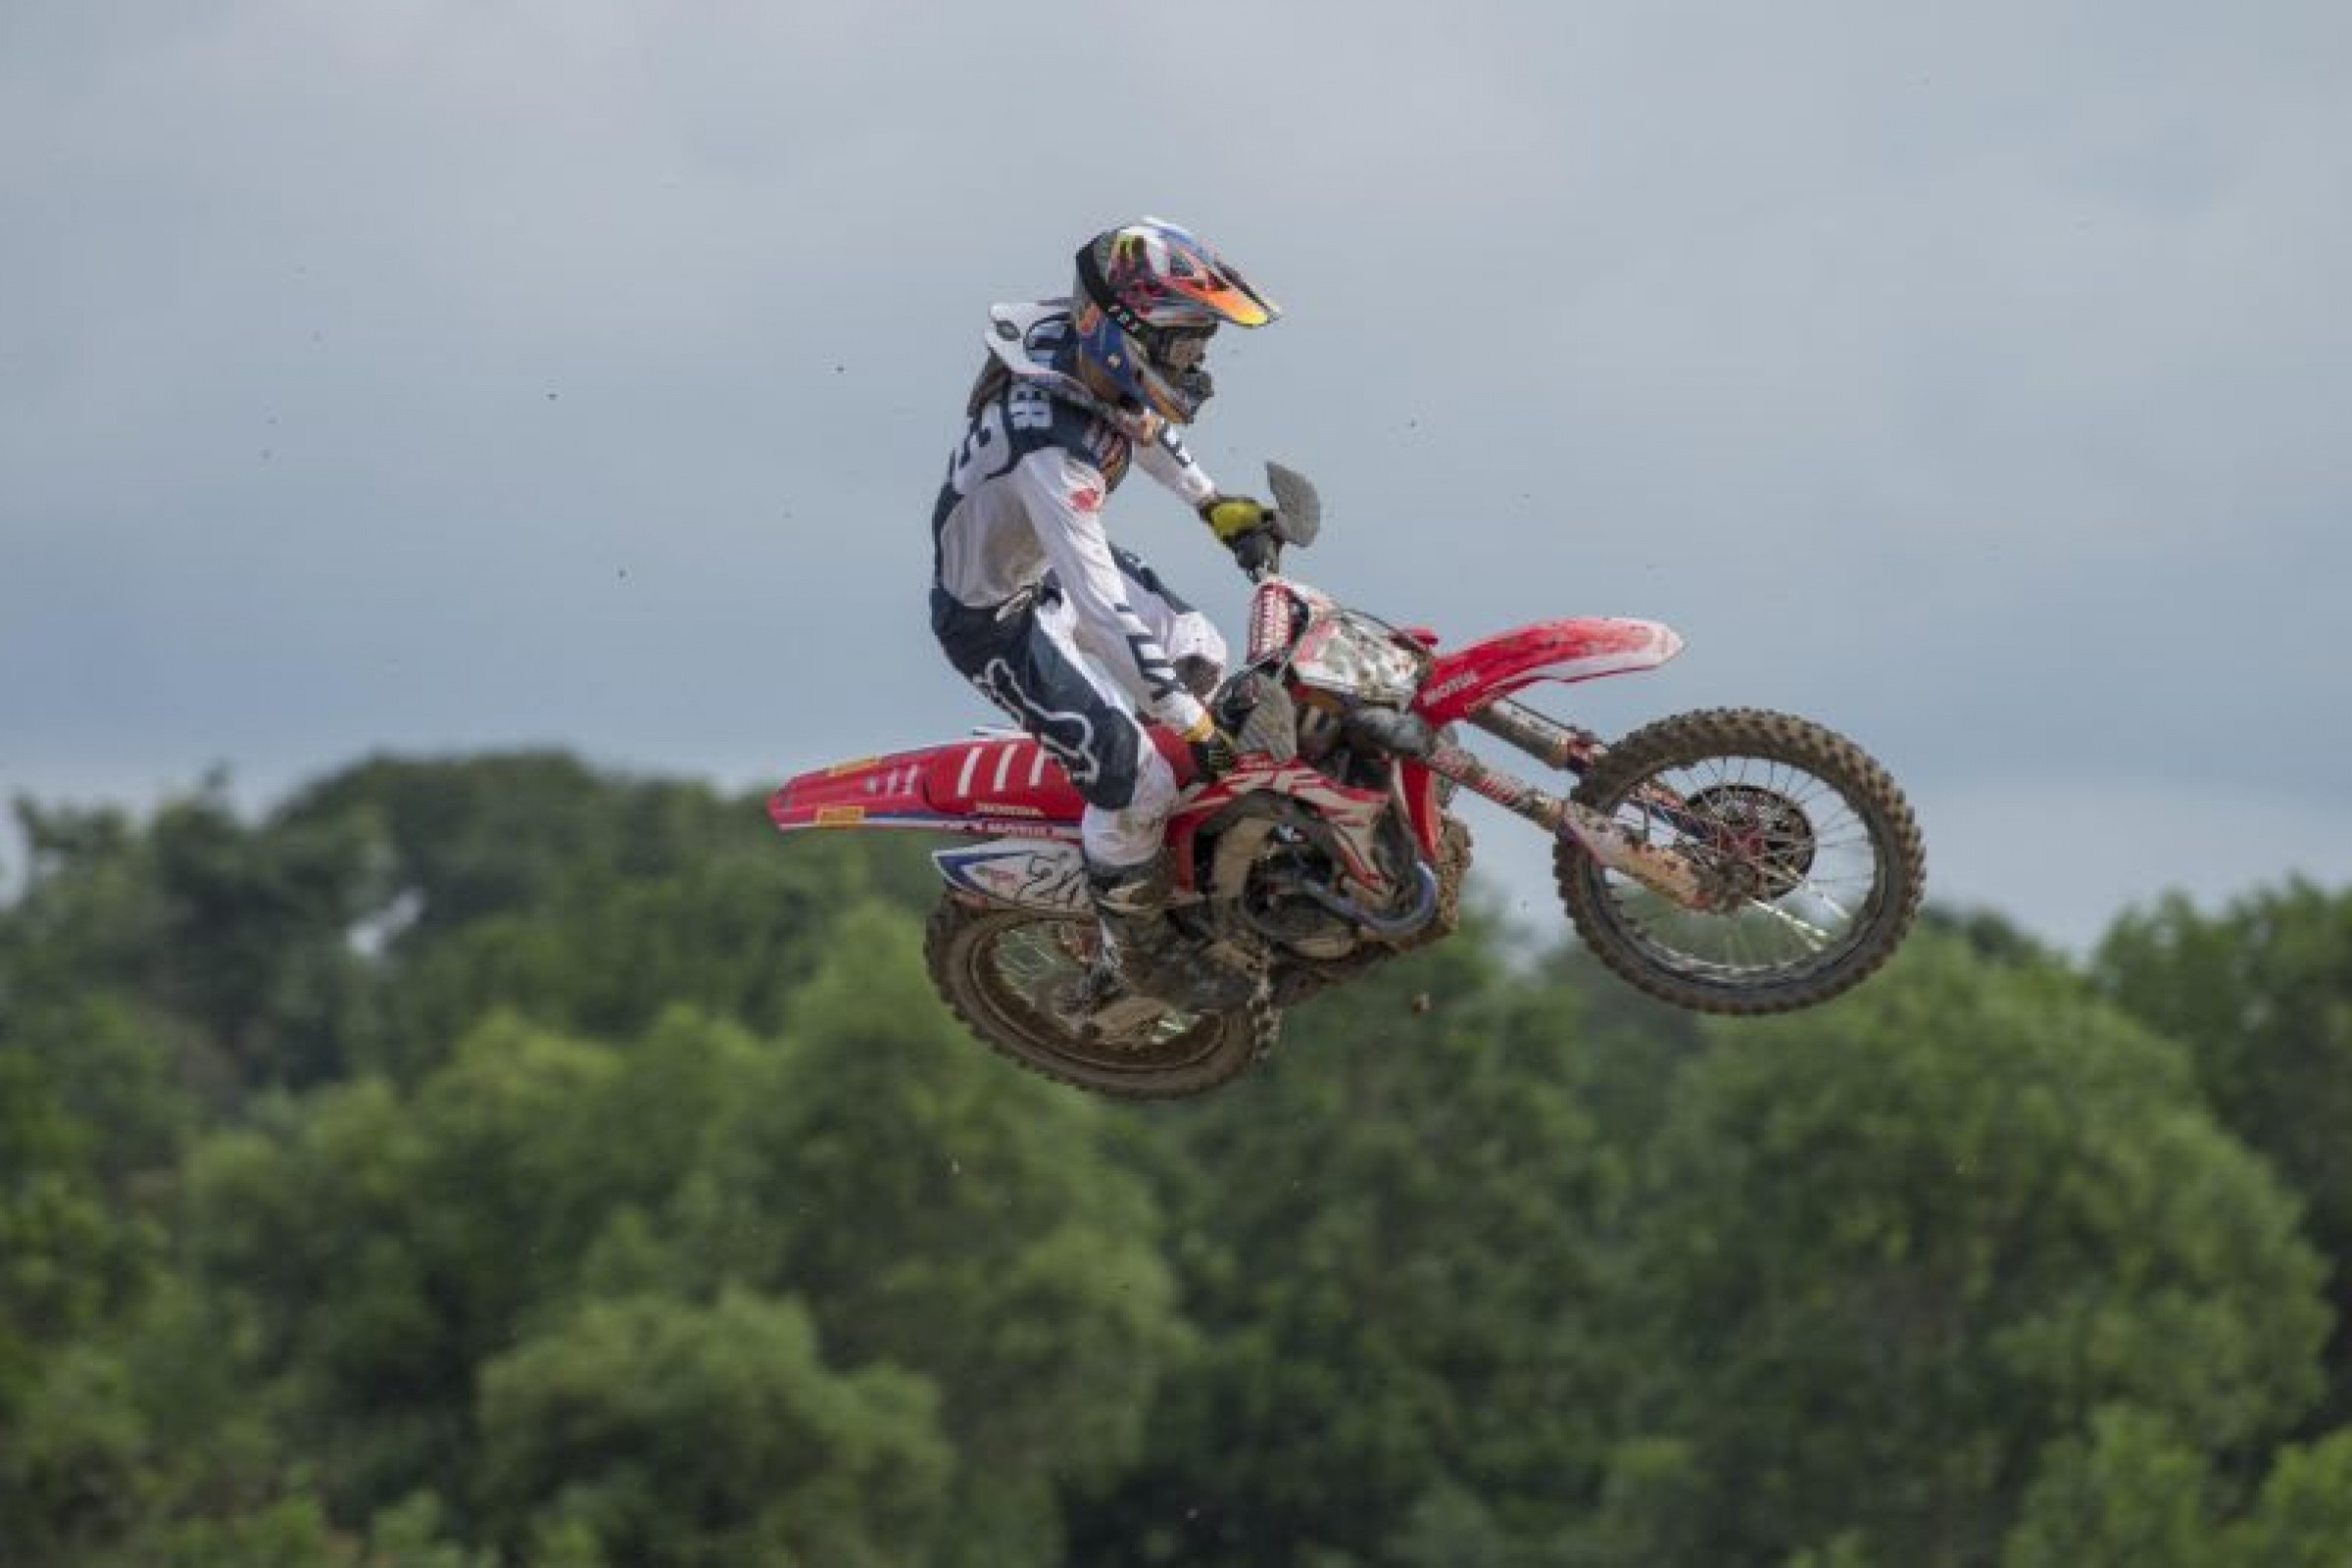 Replay Alex Martin Runs It In On Austin Forkner at Southwick - Motocross